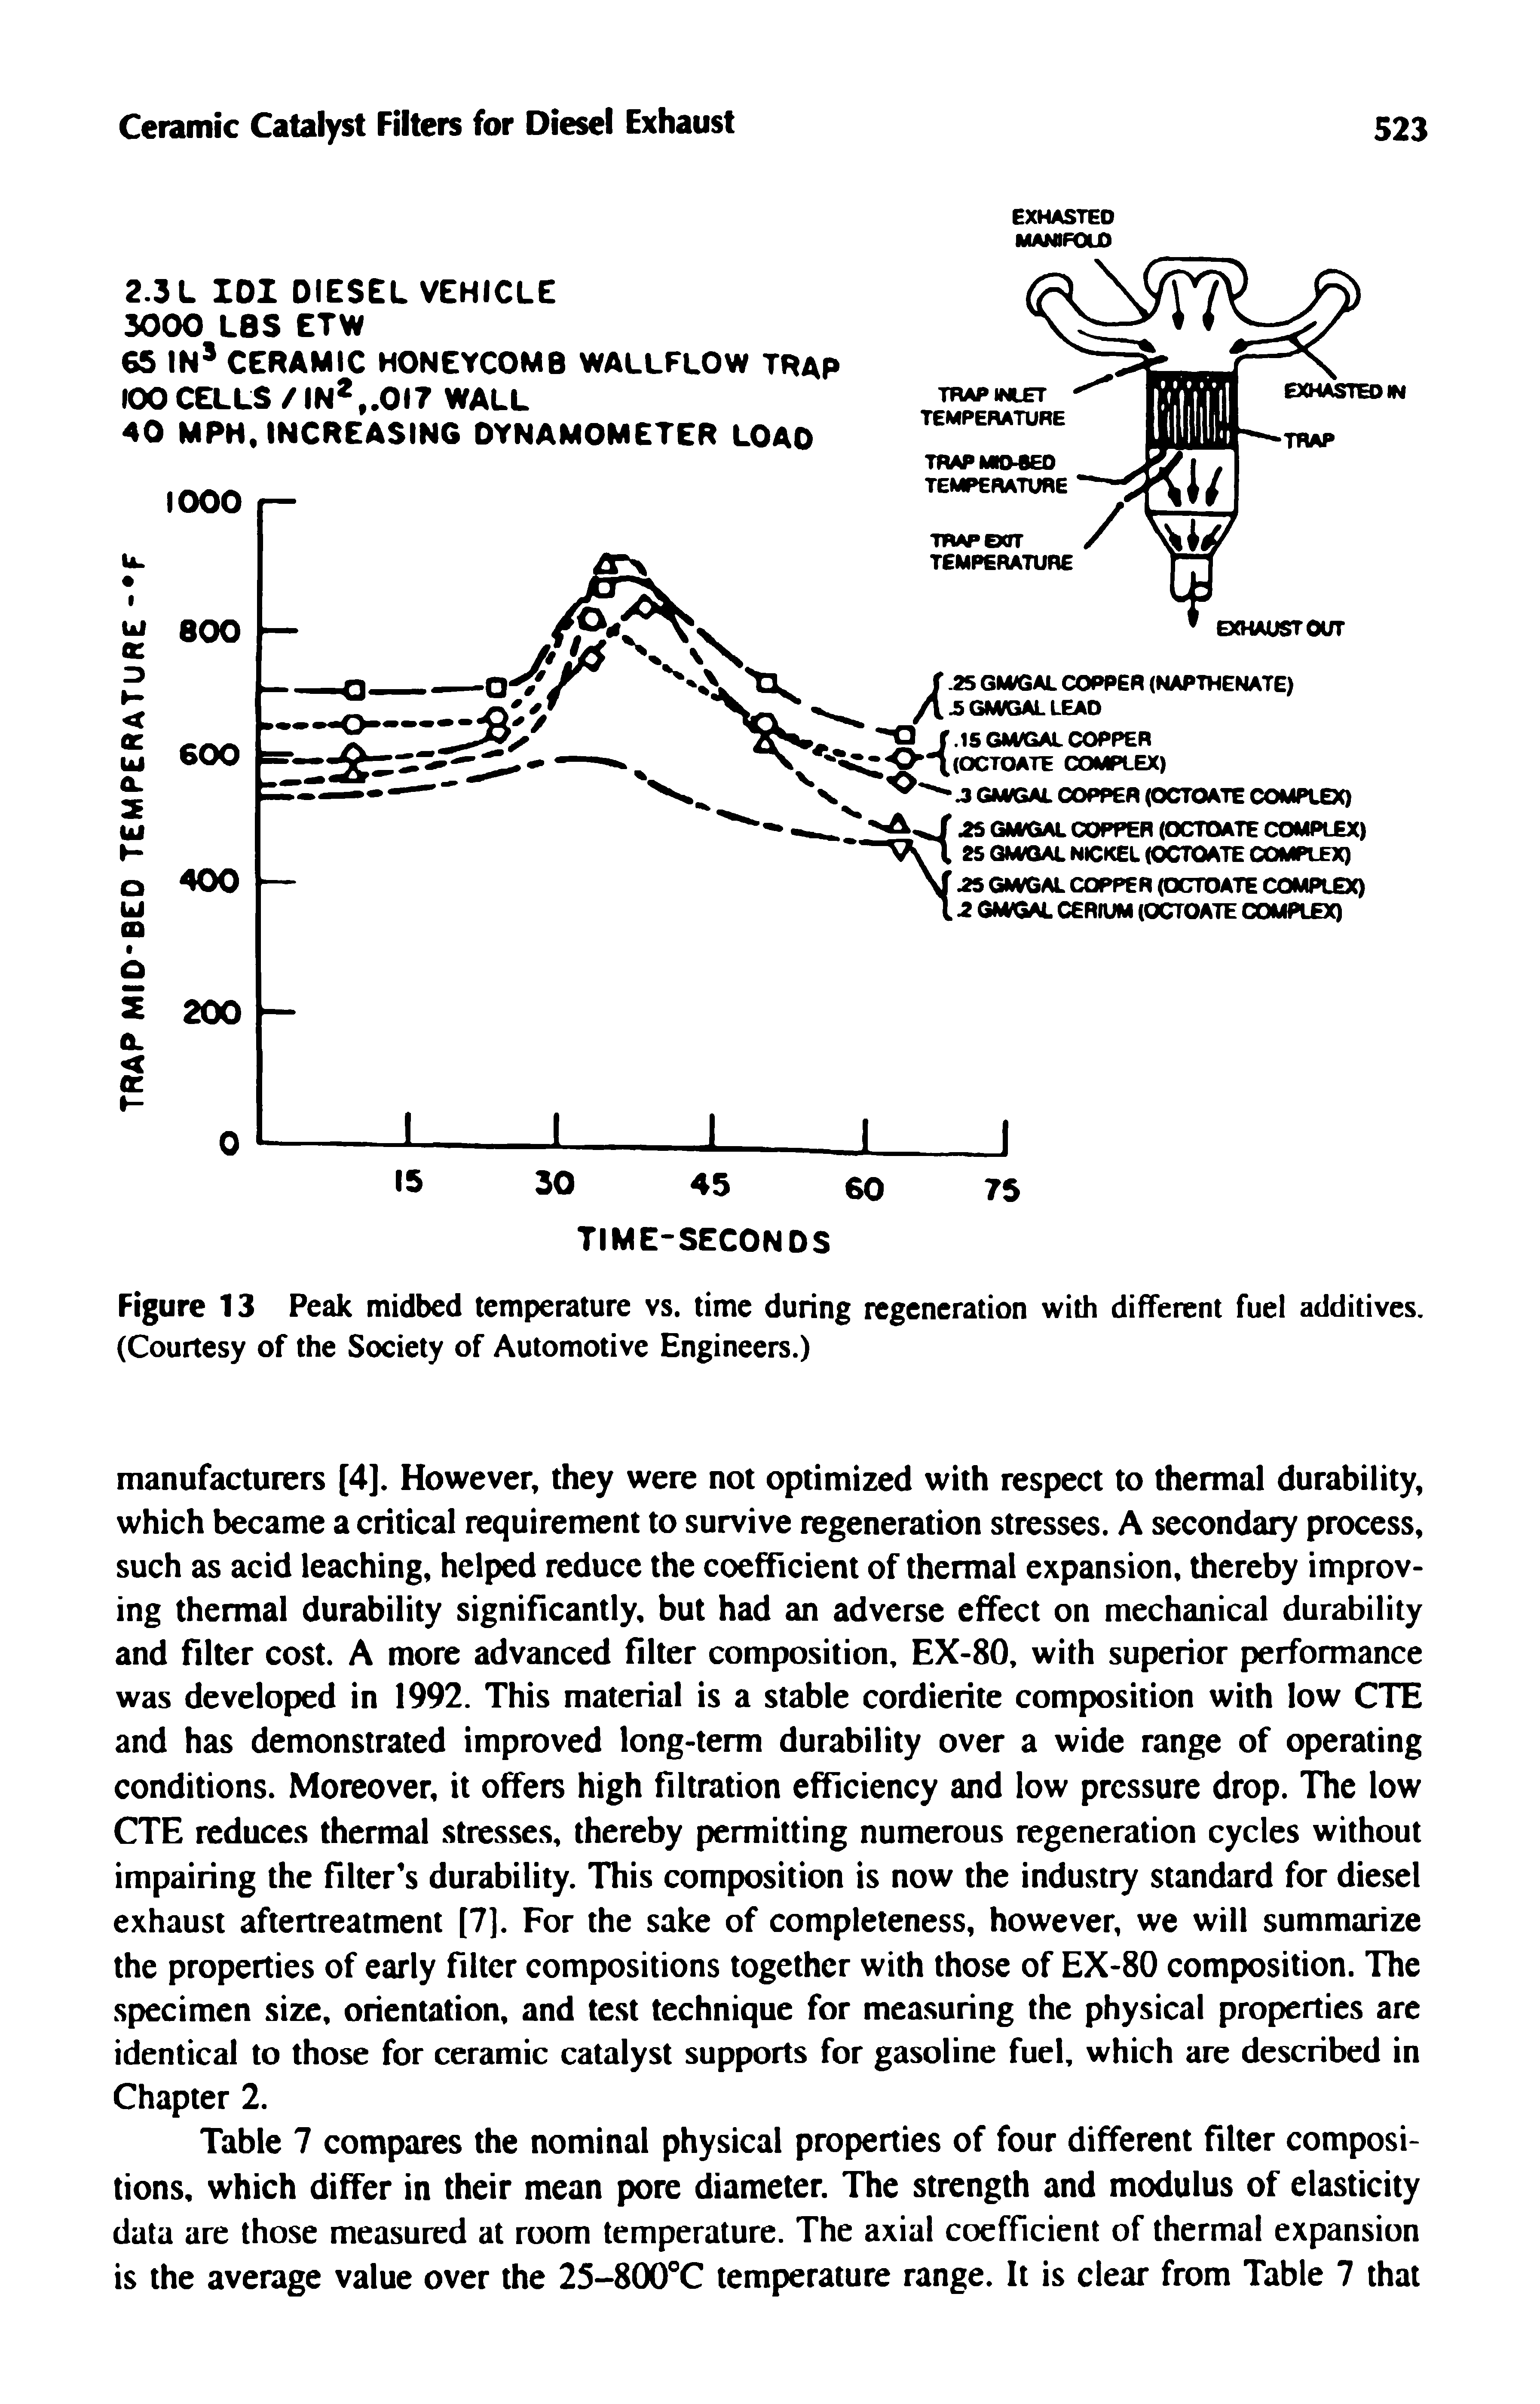 Figure 13 Peak midbed temperature vs. time during regeneration with different fuel additives. (Courtesy of the Society of Automotive Engineers.)...